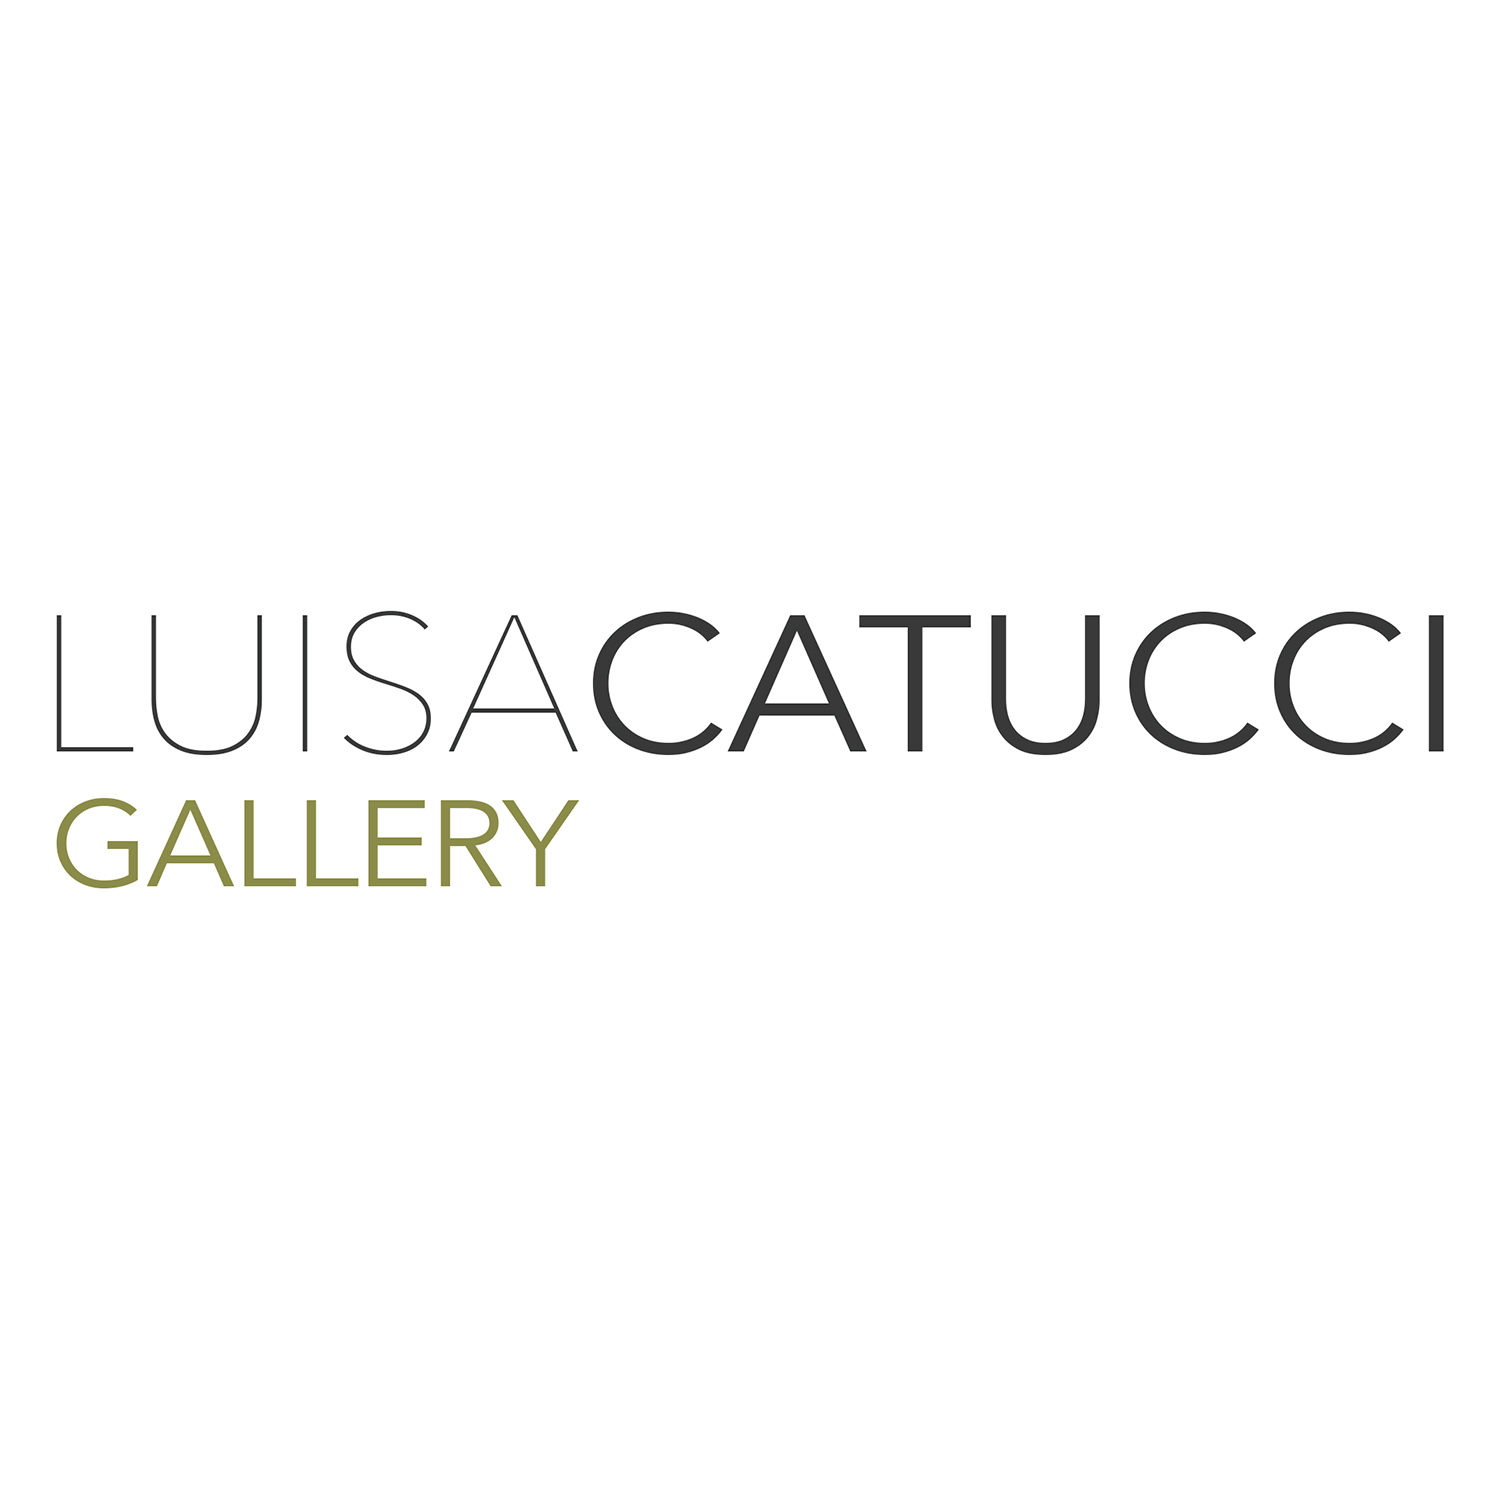 LUISA CATUCCI GALLERY